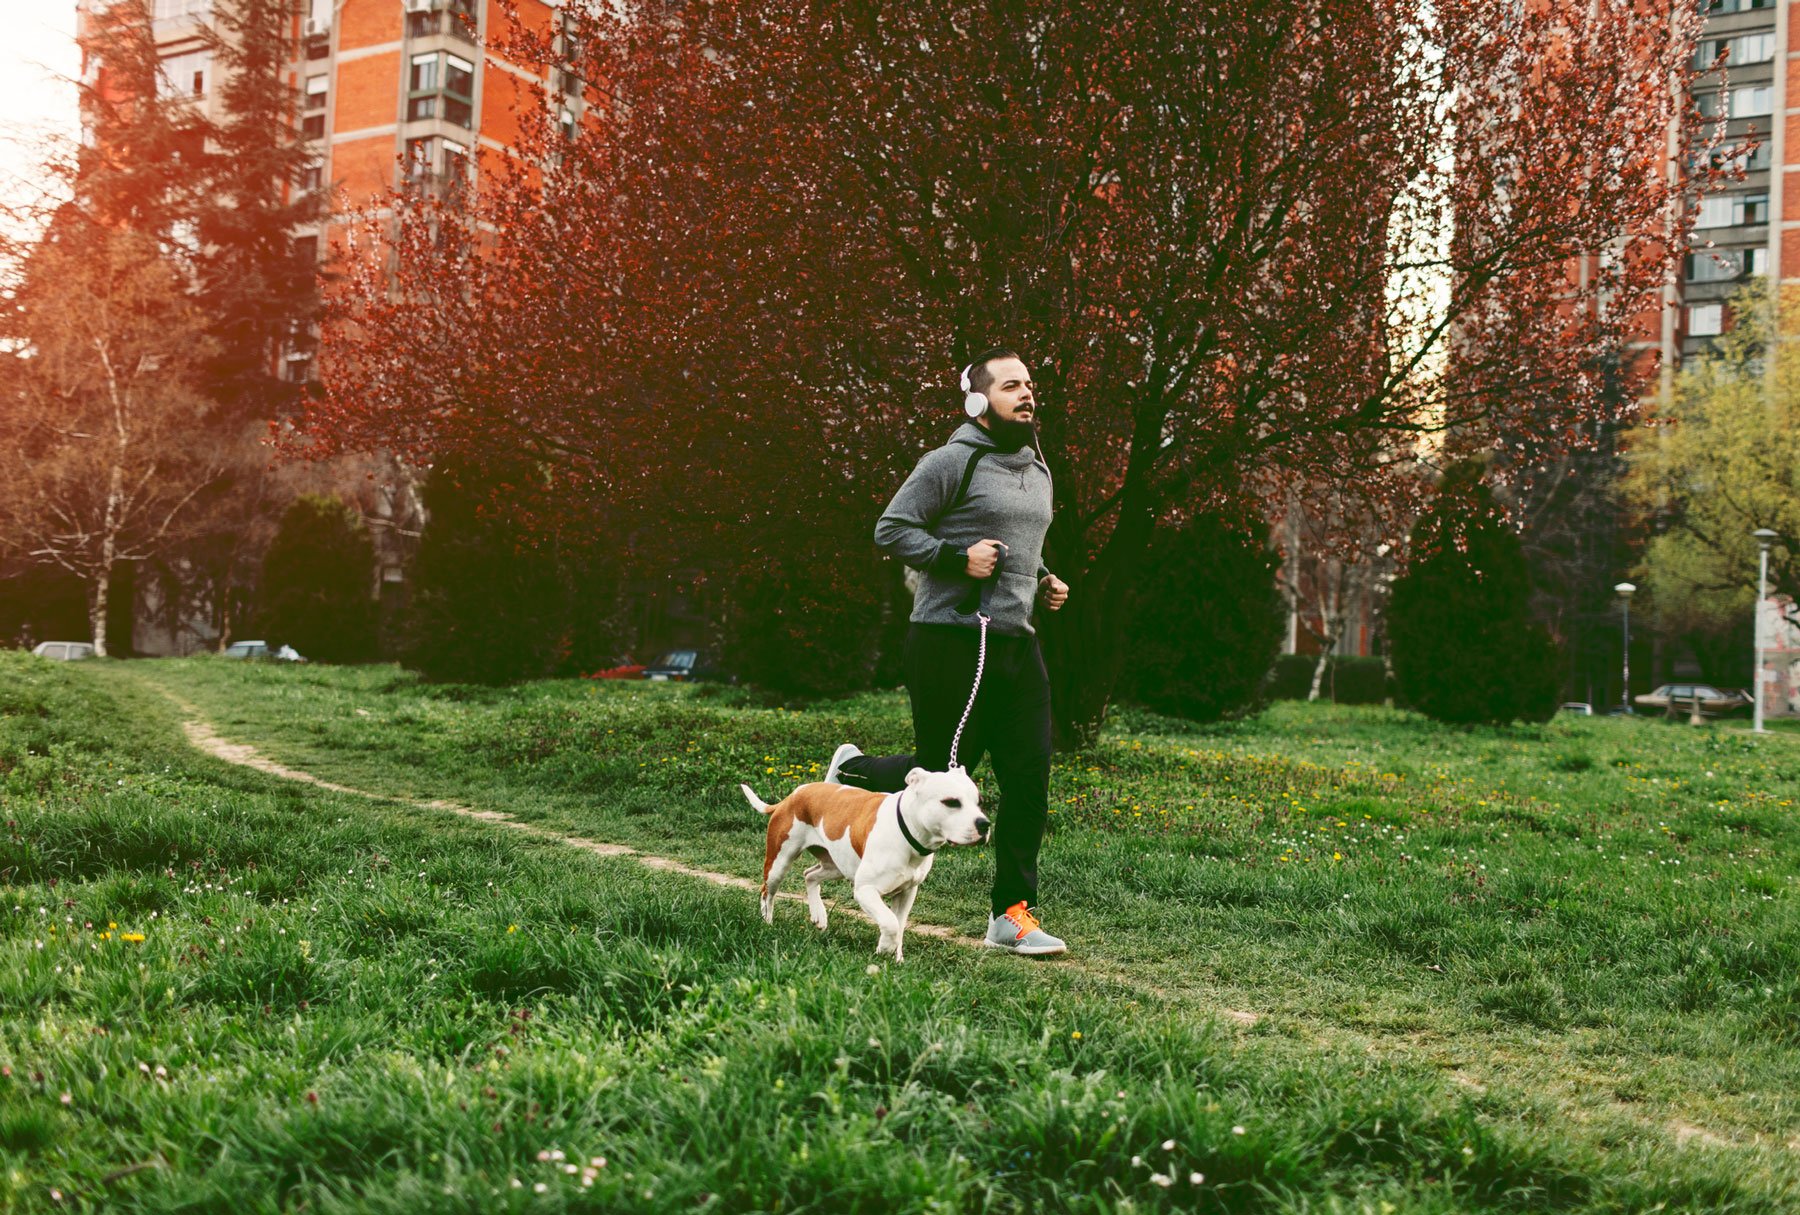 Now is the time to take your dog for a jog